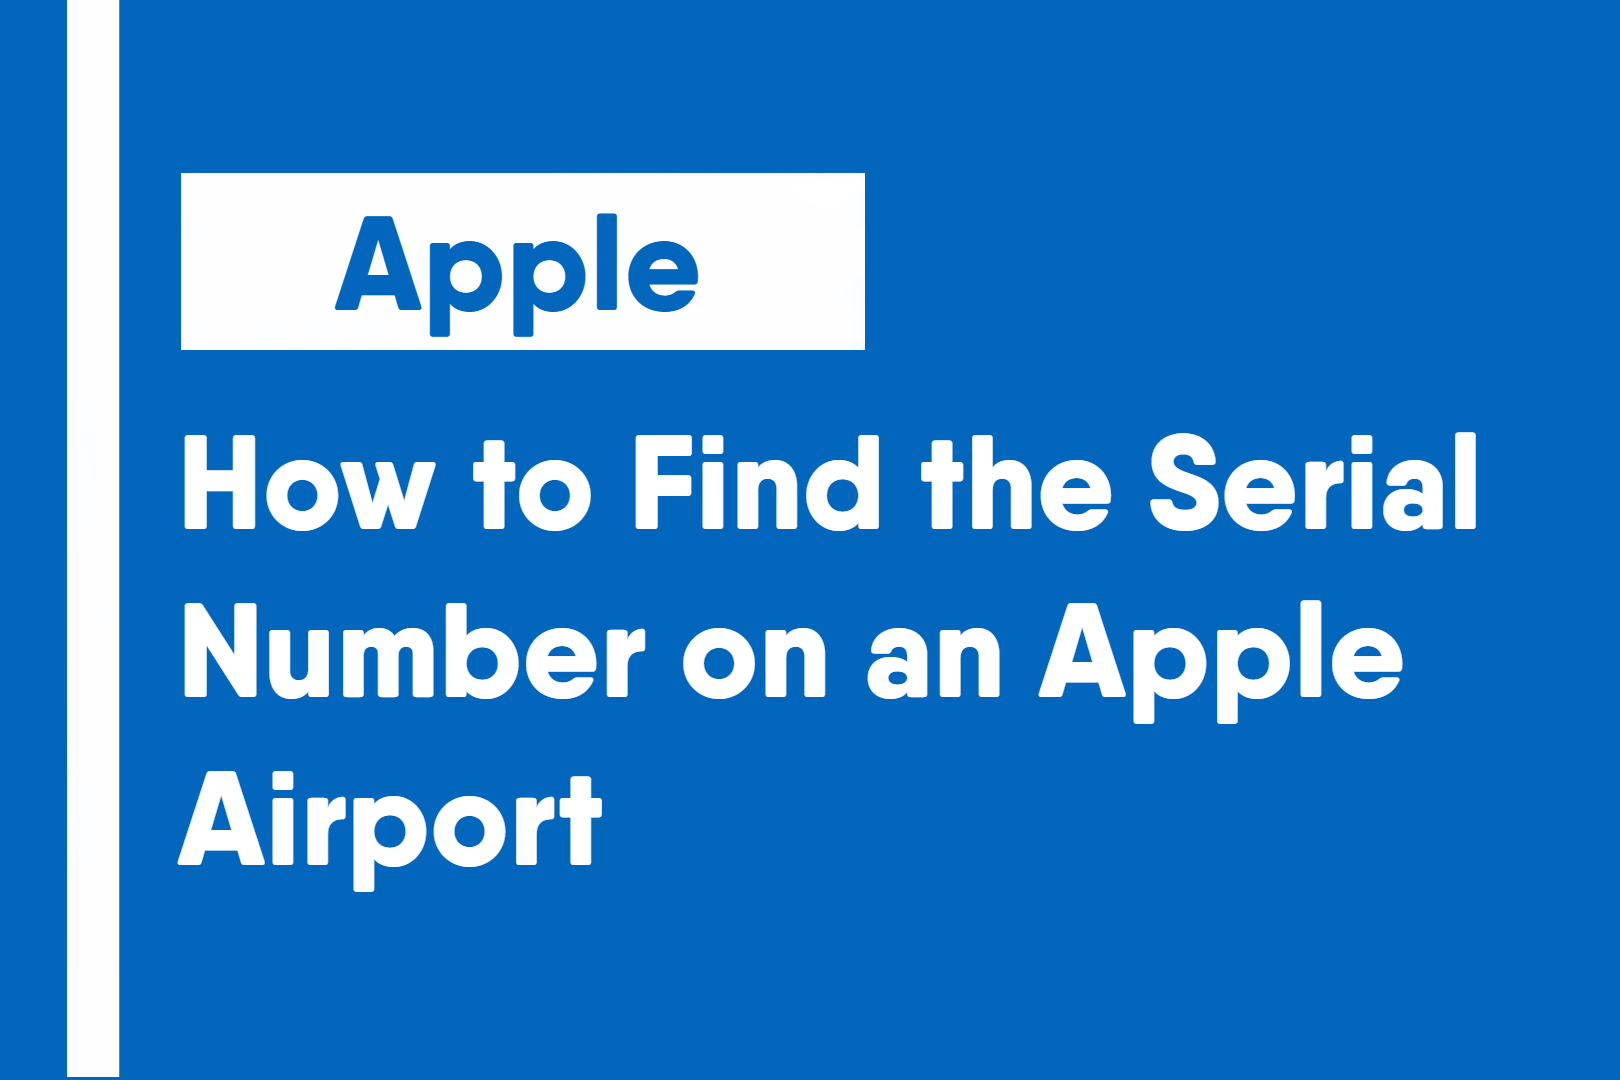 How to Find the Serial Number on an Apple Airport